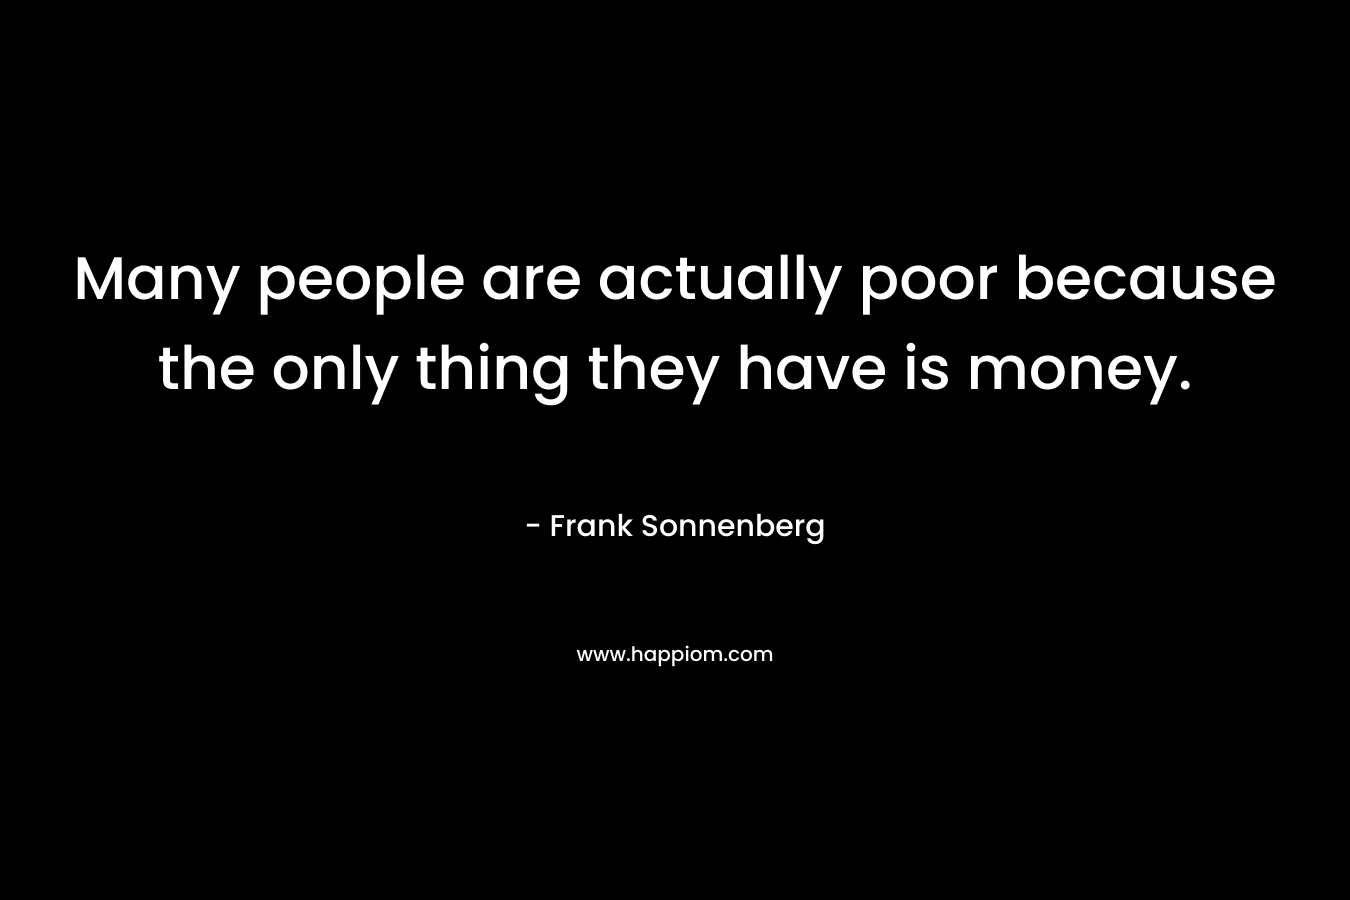 Many people are actually poor because the only thing they have is money.